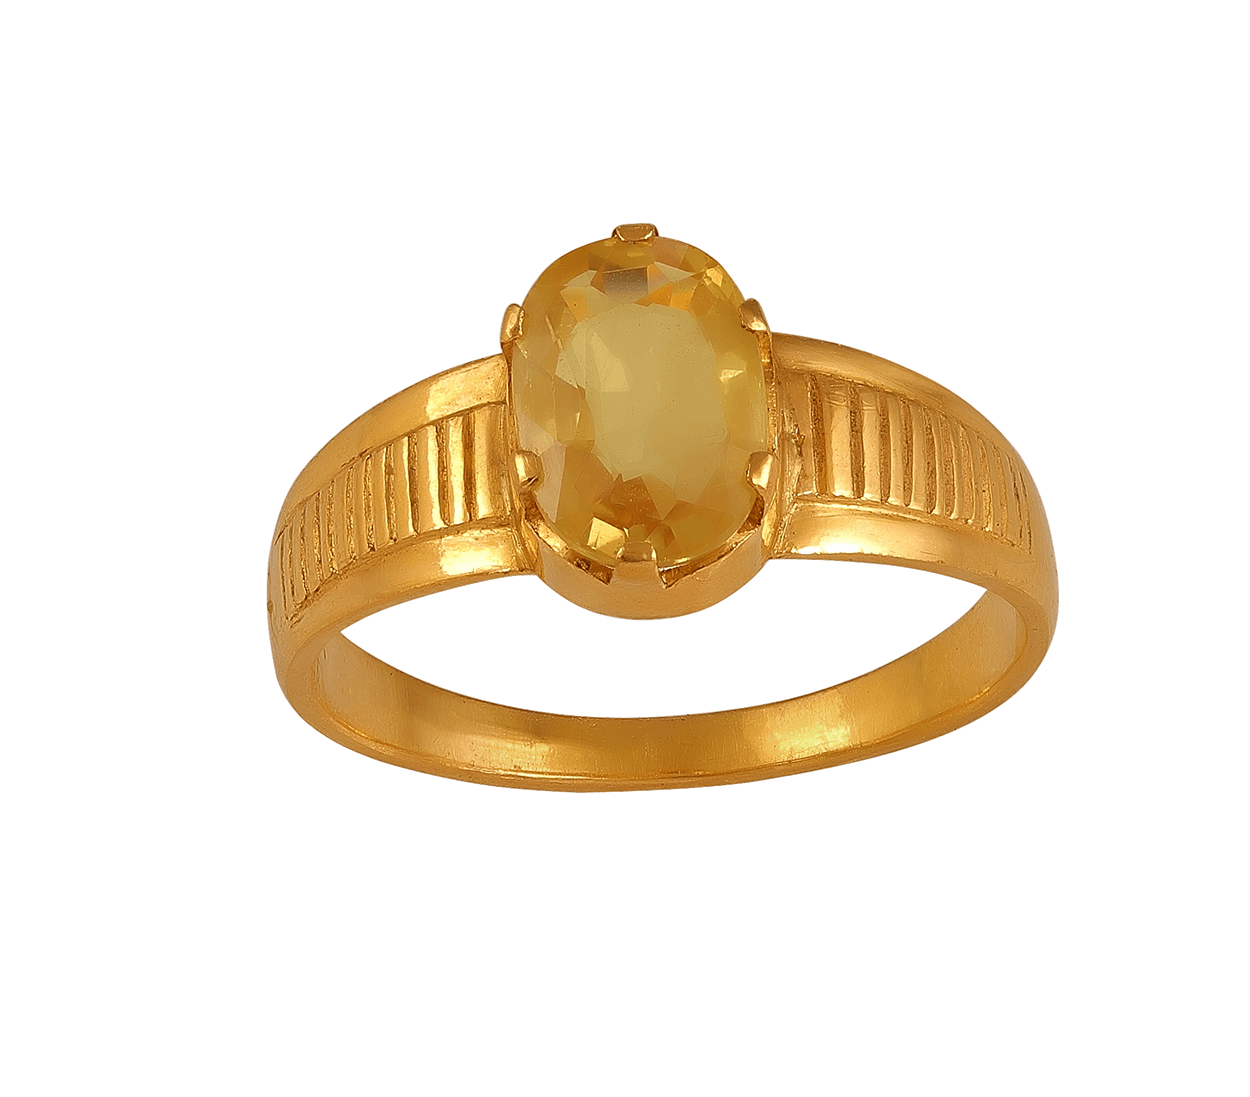 Buy BARMUNDA gems 9.25 Ratti A+ Quality Yellow Sapphire Pukhraj Gemstone  Ring for Women's and Men's {Lab Certified} Online In India At Discounted  Prices